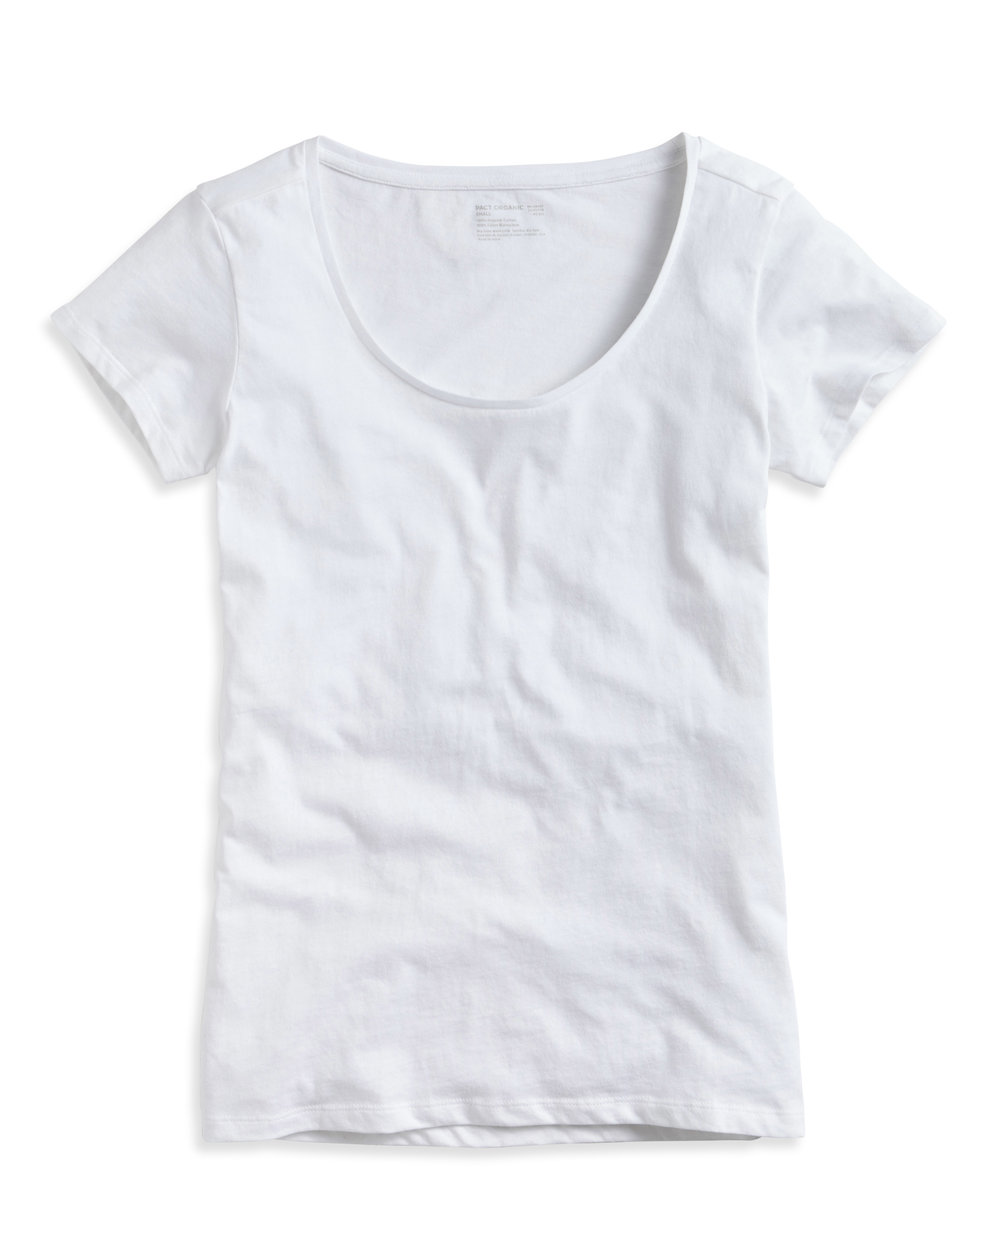 Relaxed Fit Eco-Blend Tee